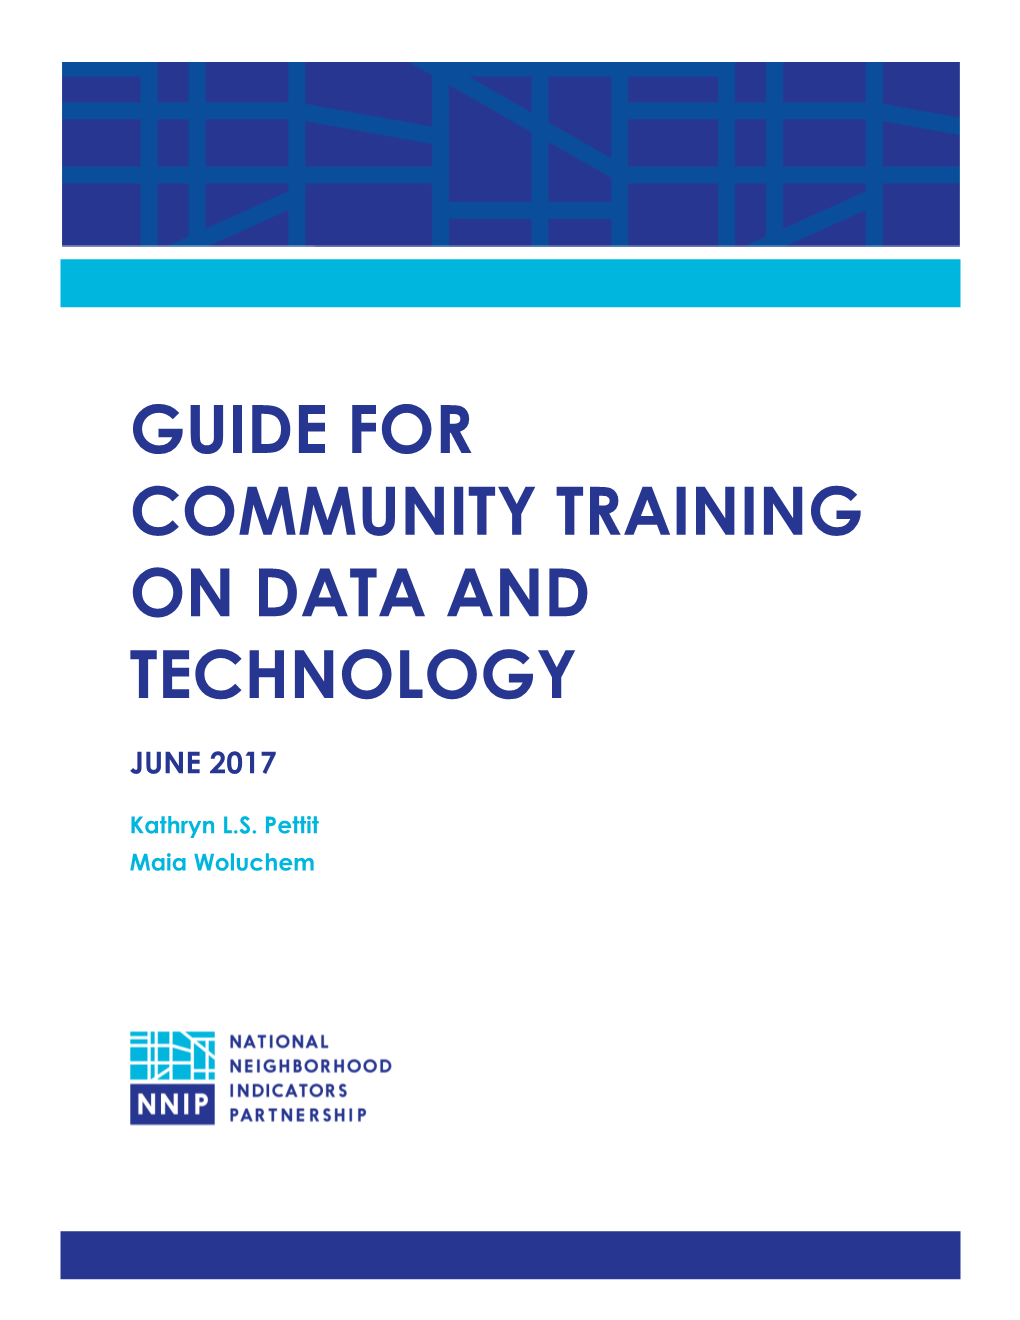 Guide for Community Training on Data and Technology